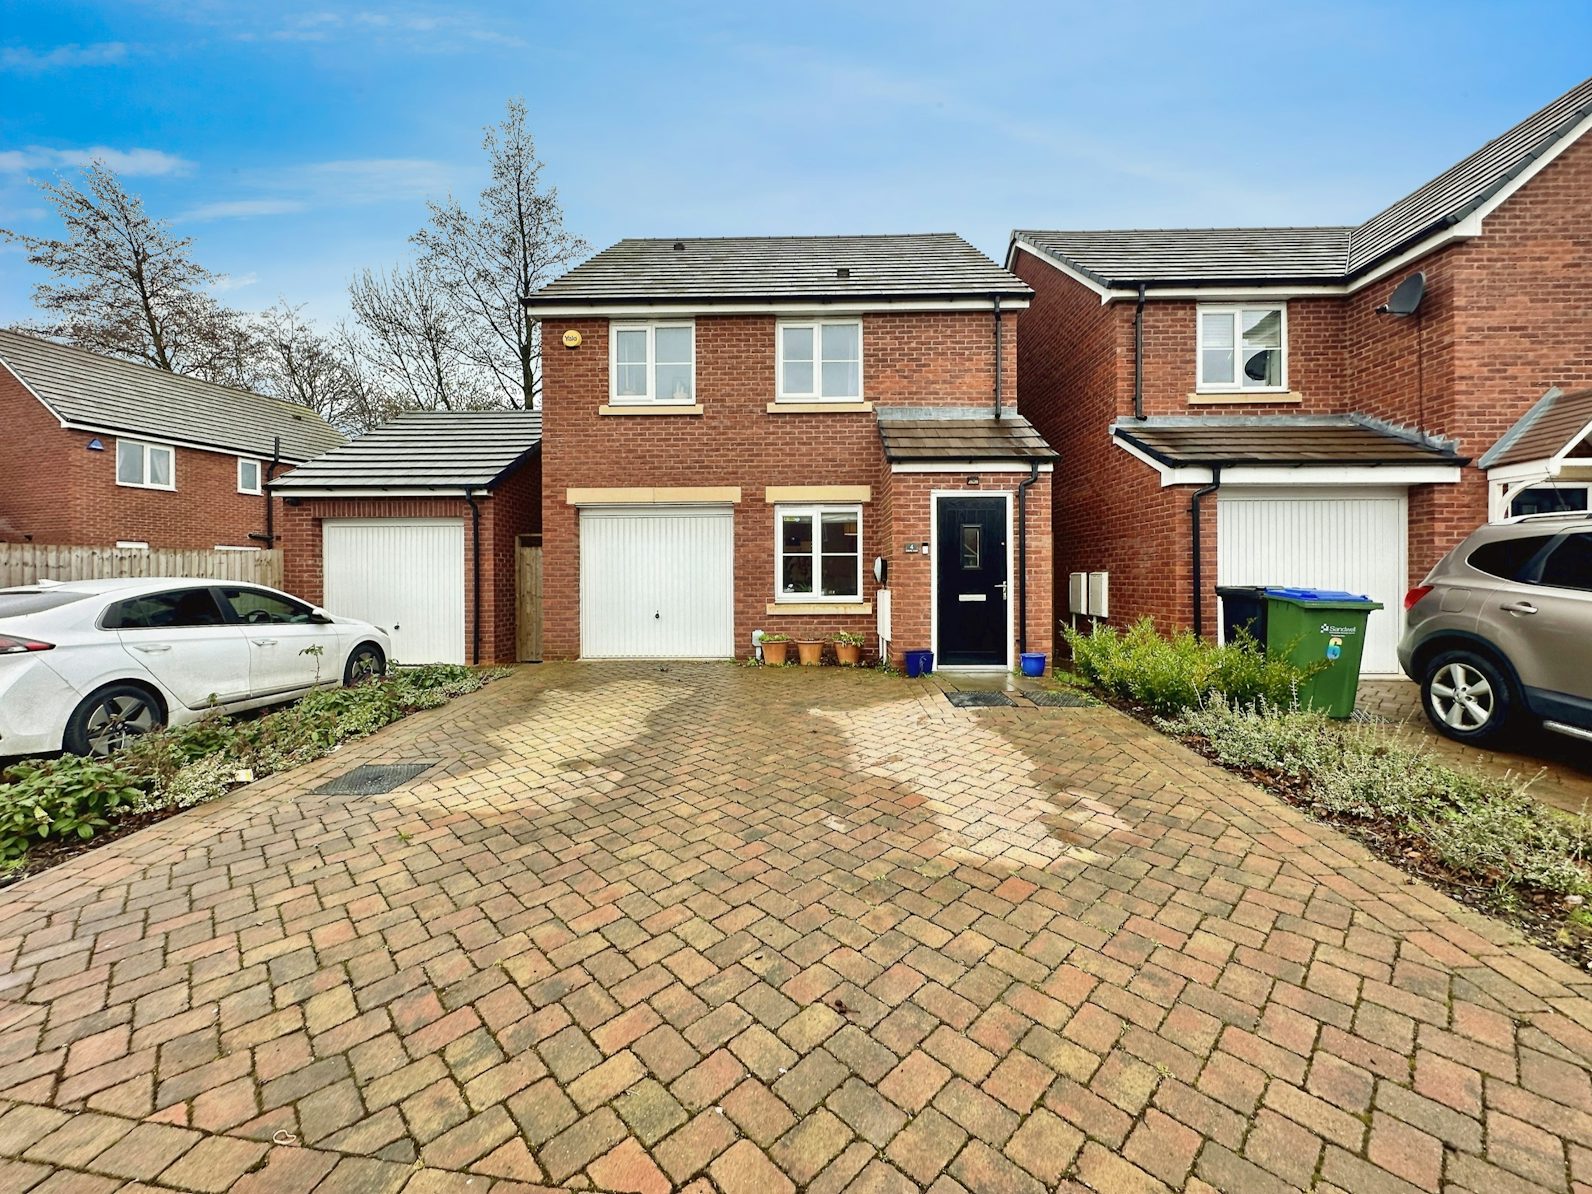 Detached House for sale on Liberty Lane West Bromwich, B70